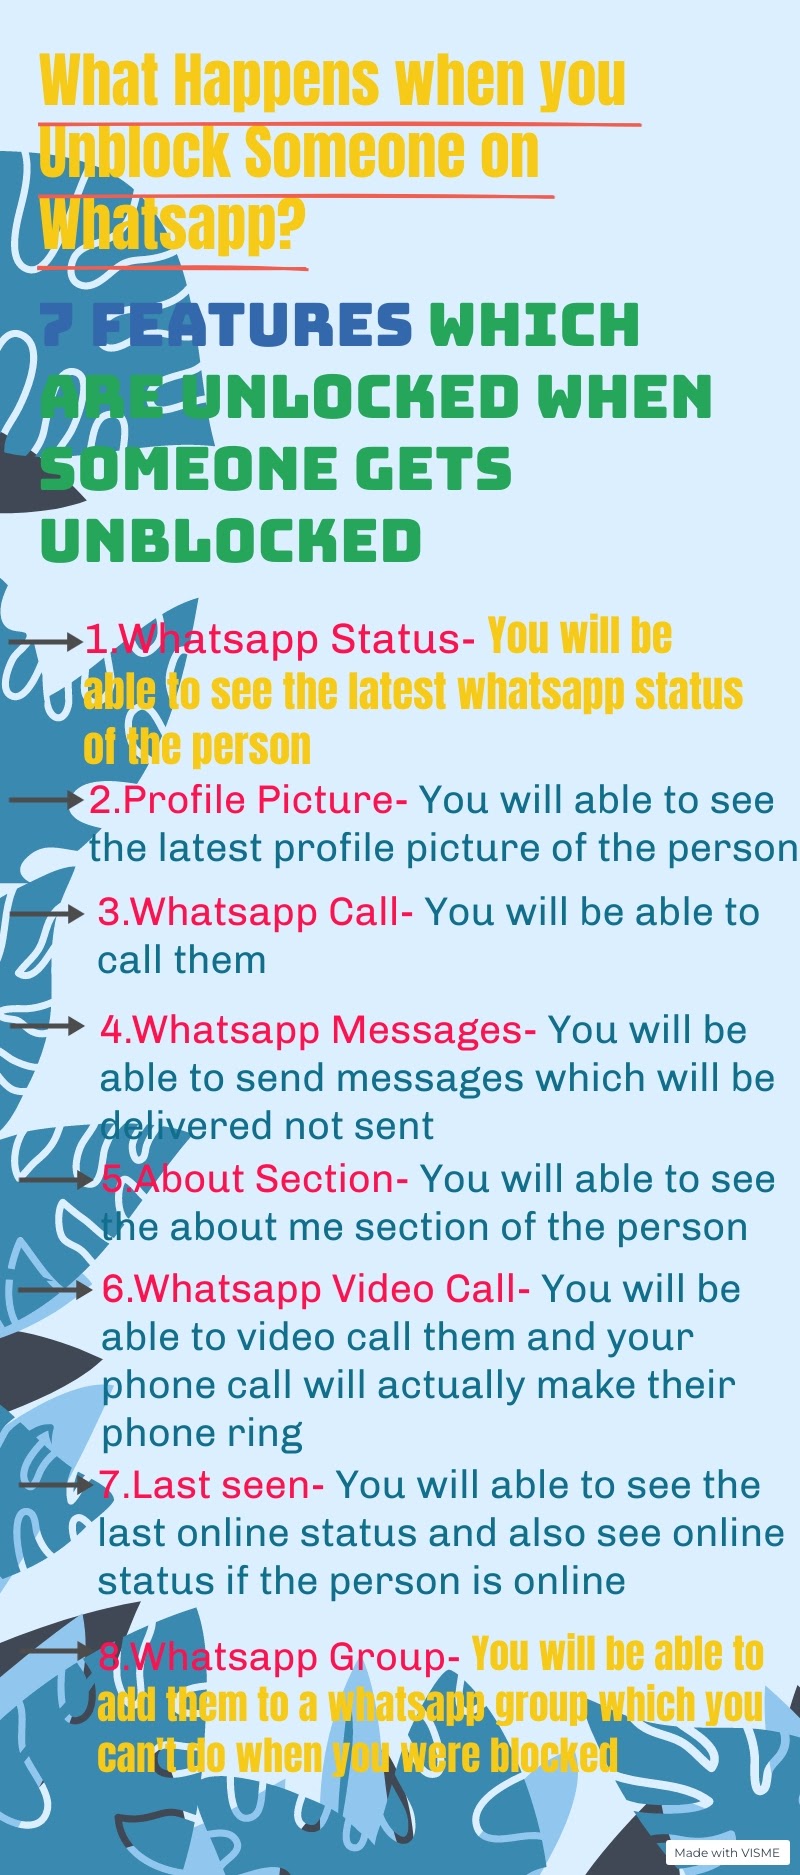 Infographic of 7 features of unblocked whatsapp account